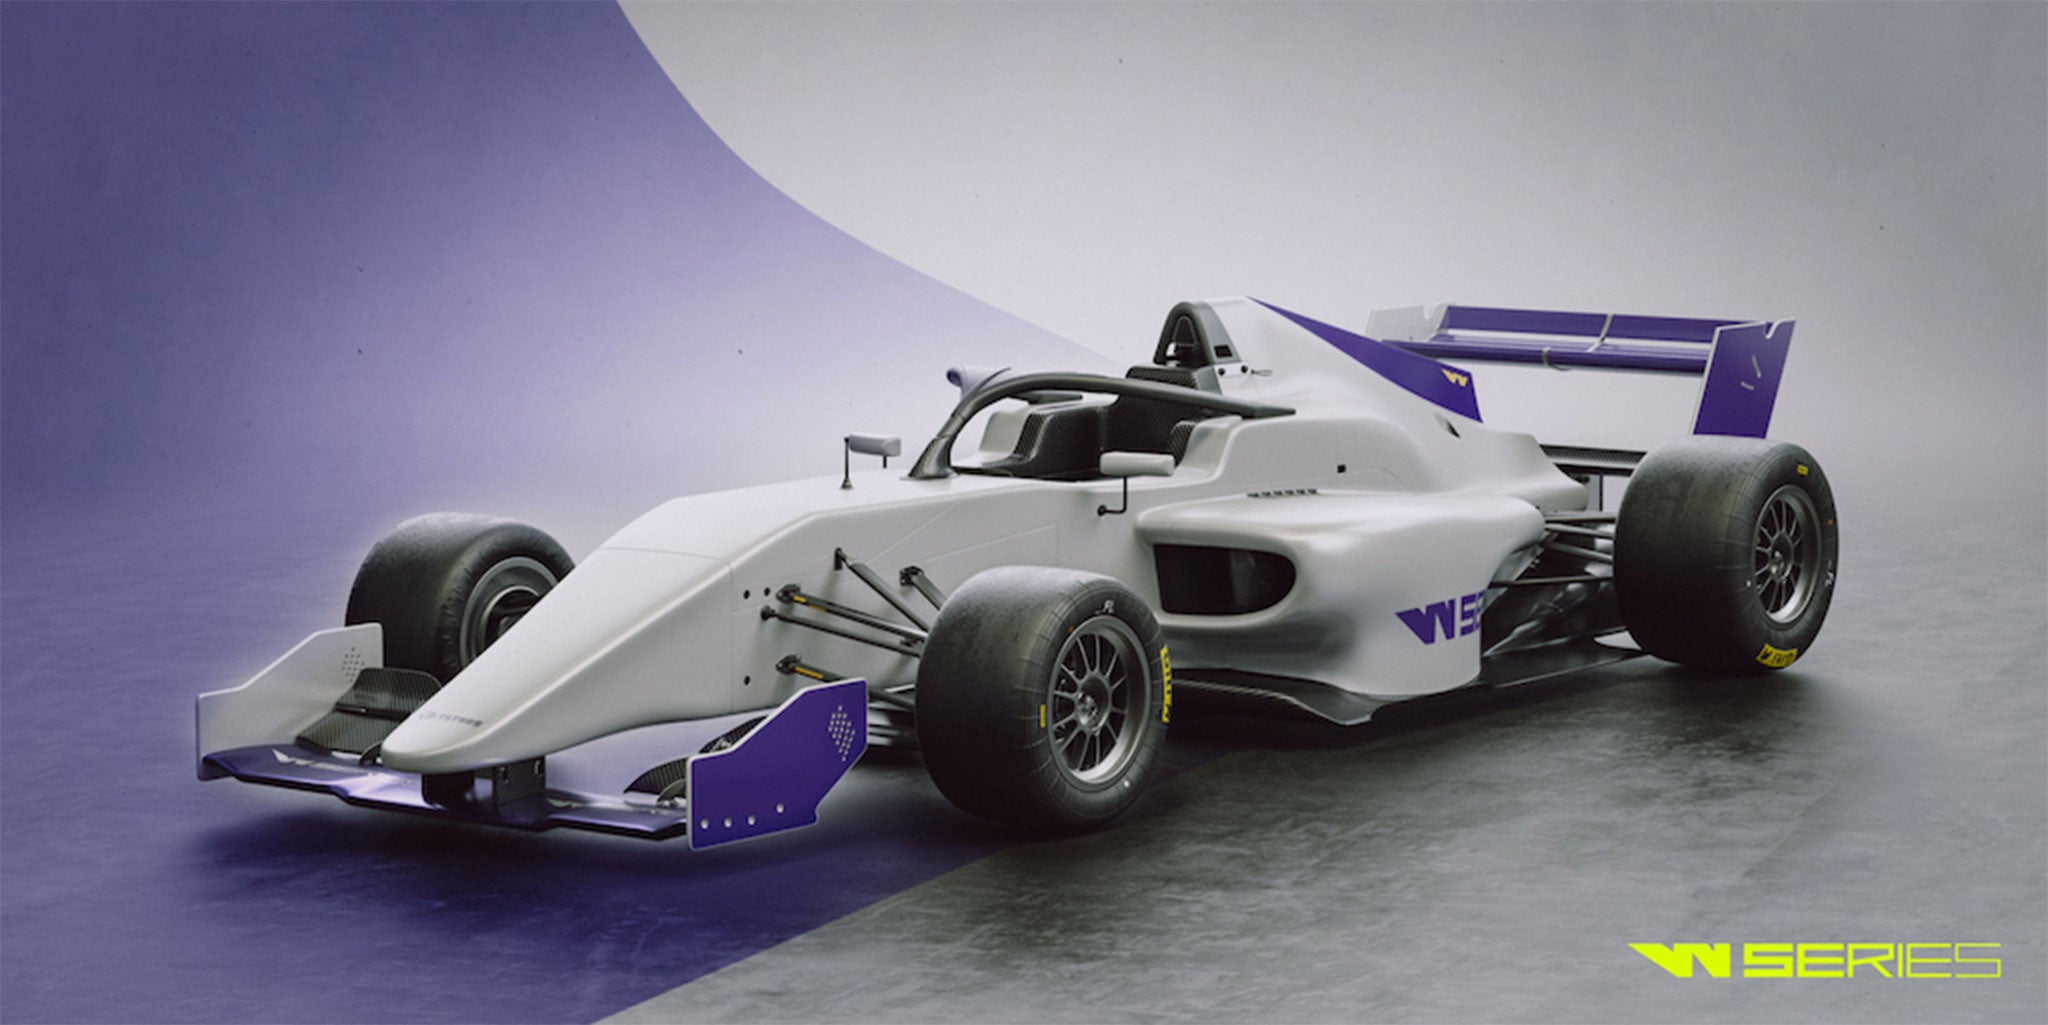 The W Series was launched on Wednesday in a bid to increase women in motorsport